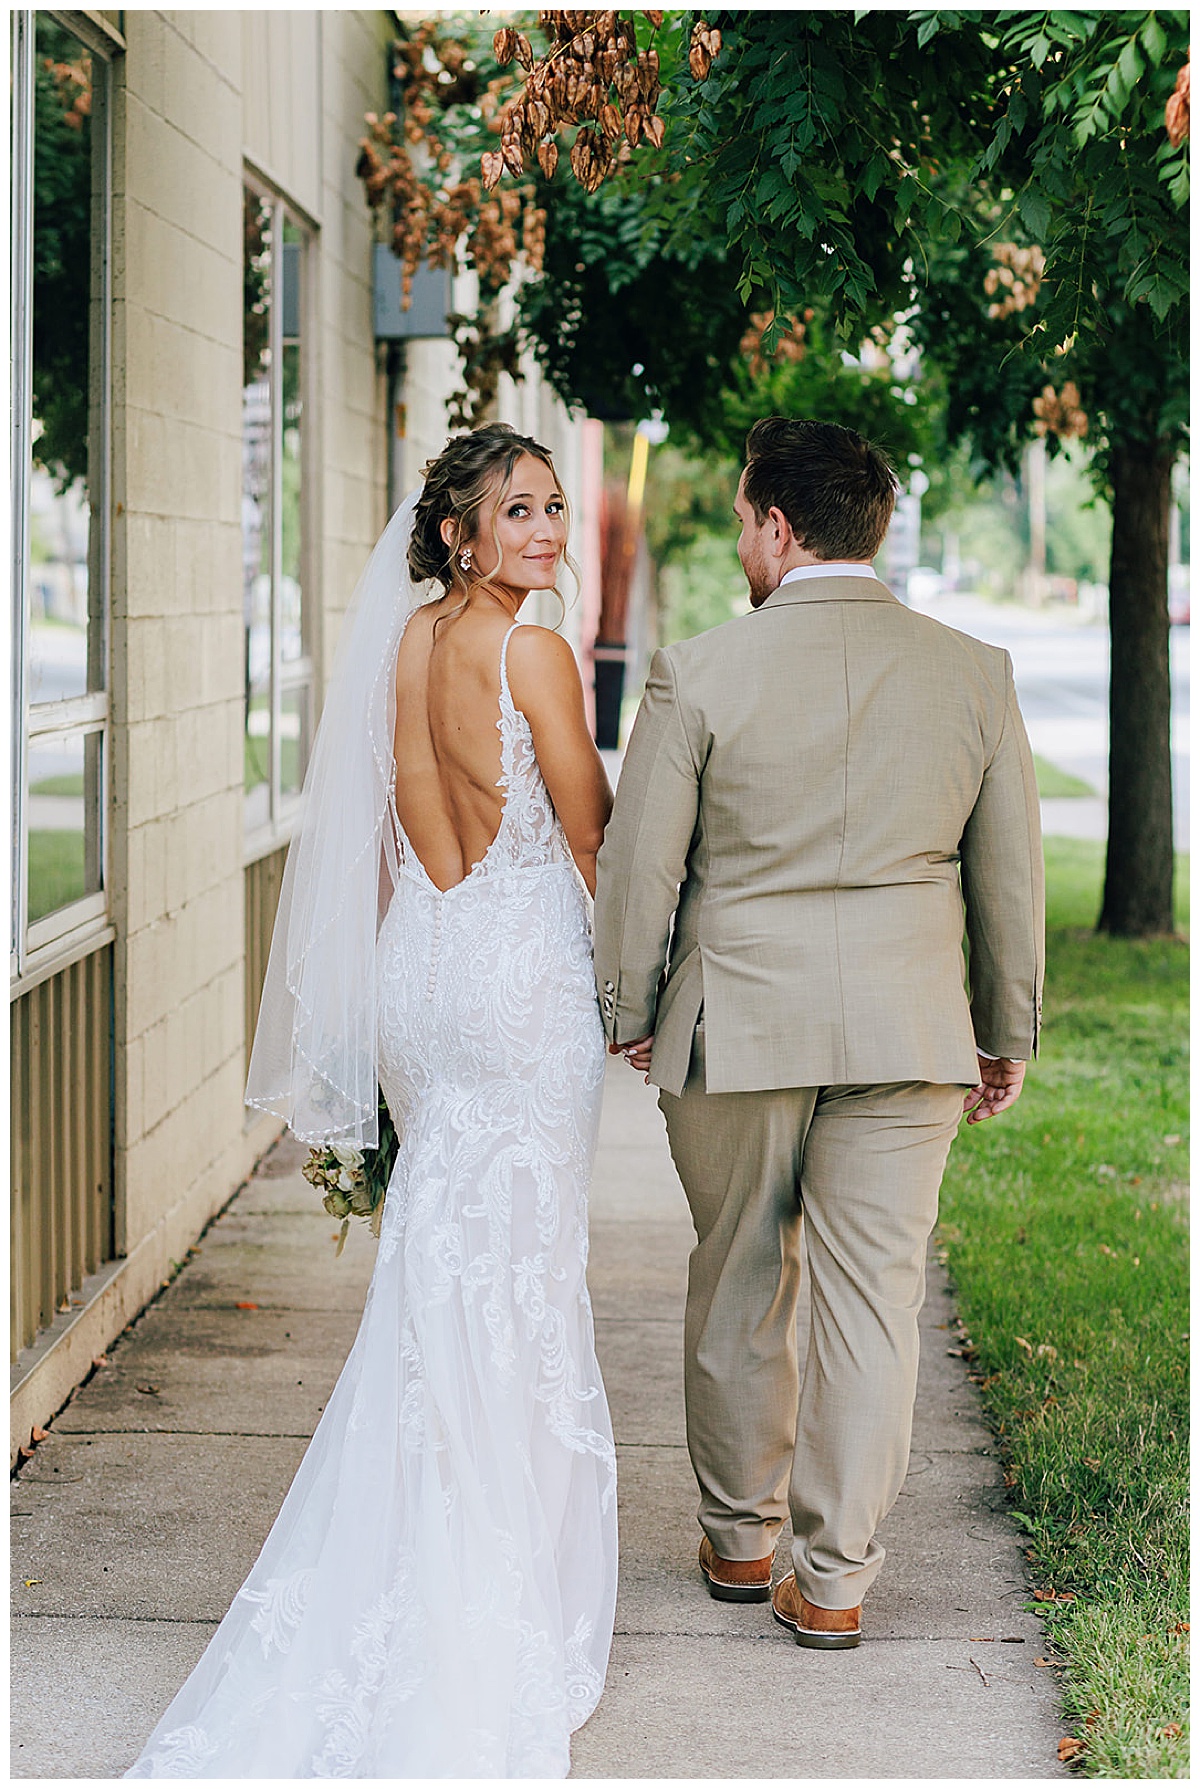 Married couple walk together for Kayla Bouren Photography